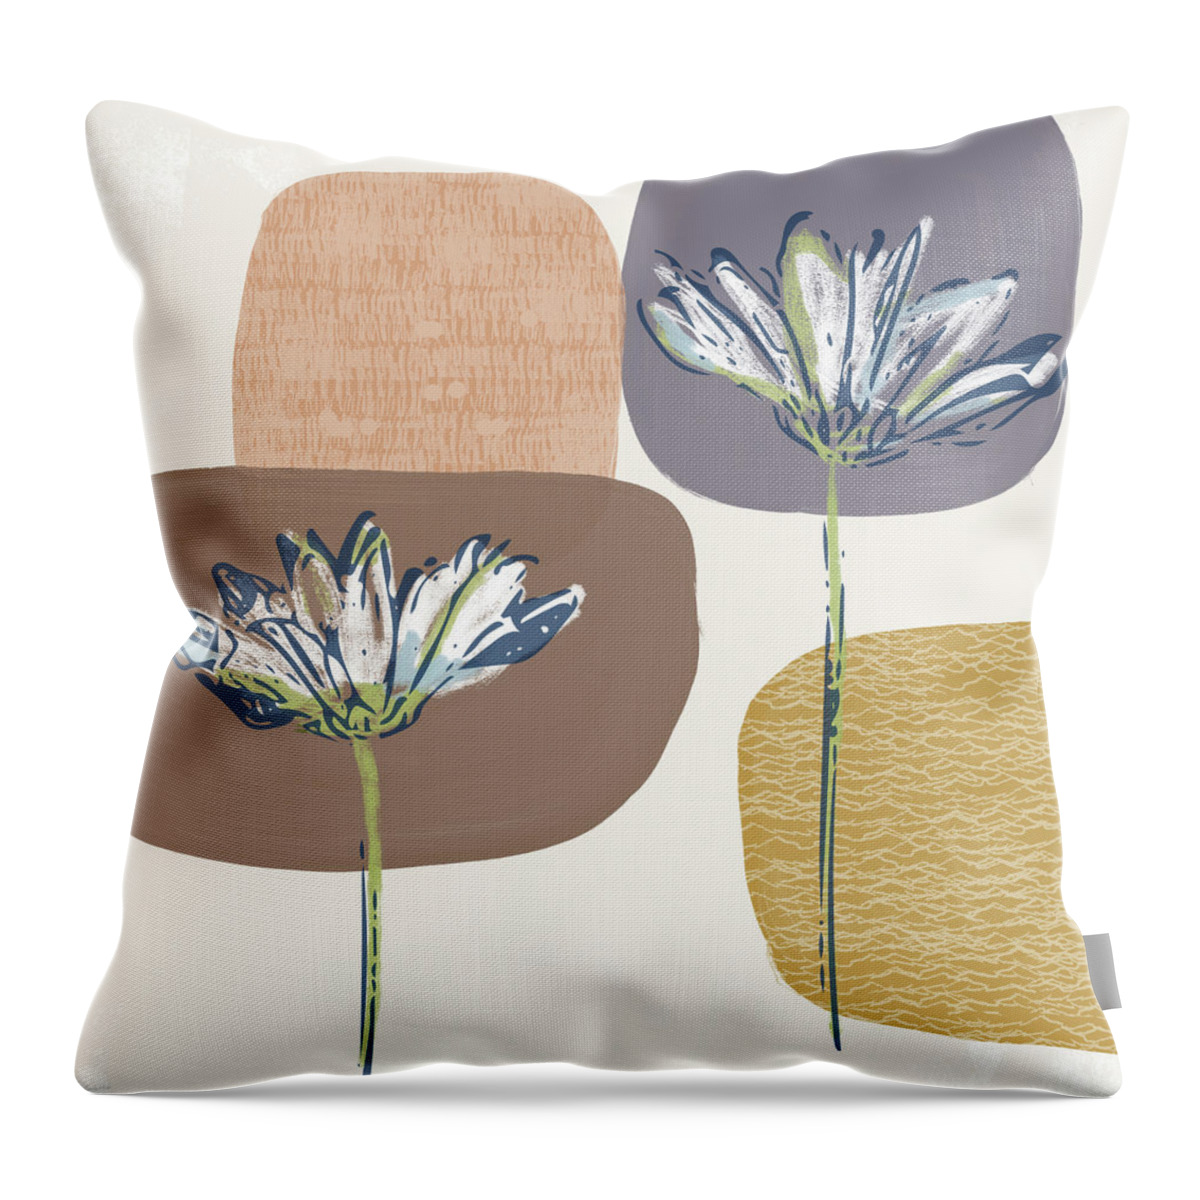 Modern Throw Pillow featuring the mixed media Modern Fall Floral 1- Art by Linda Woods by Linda Woods